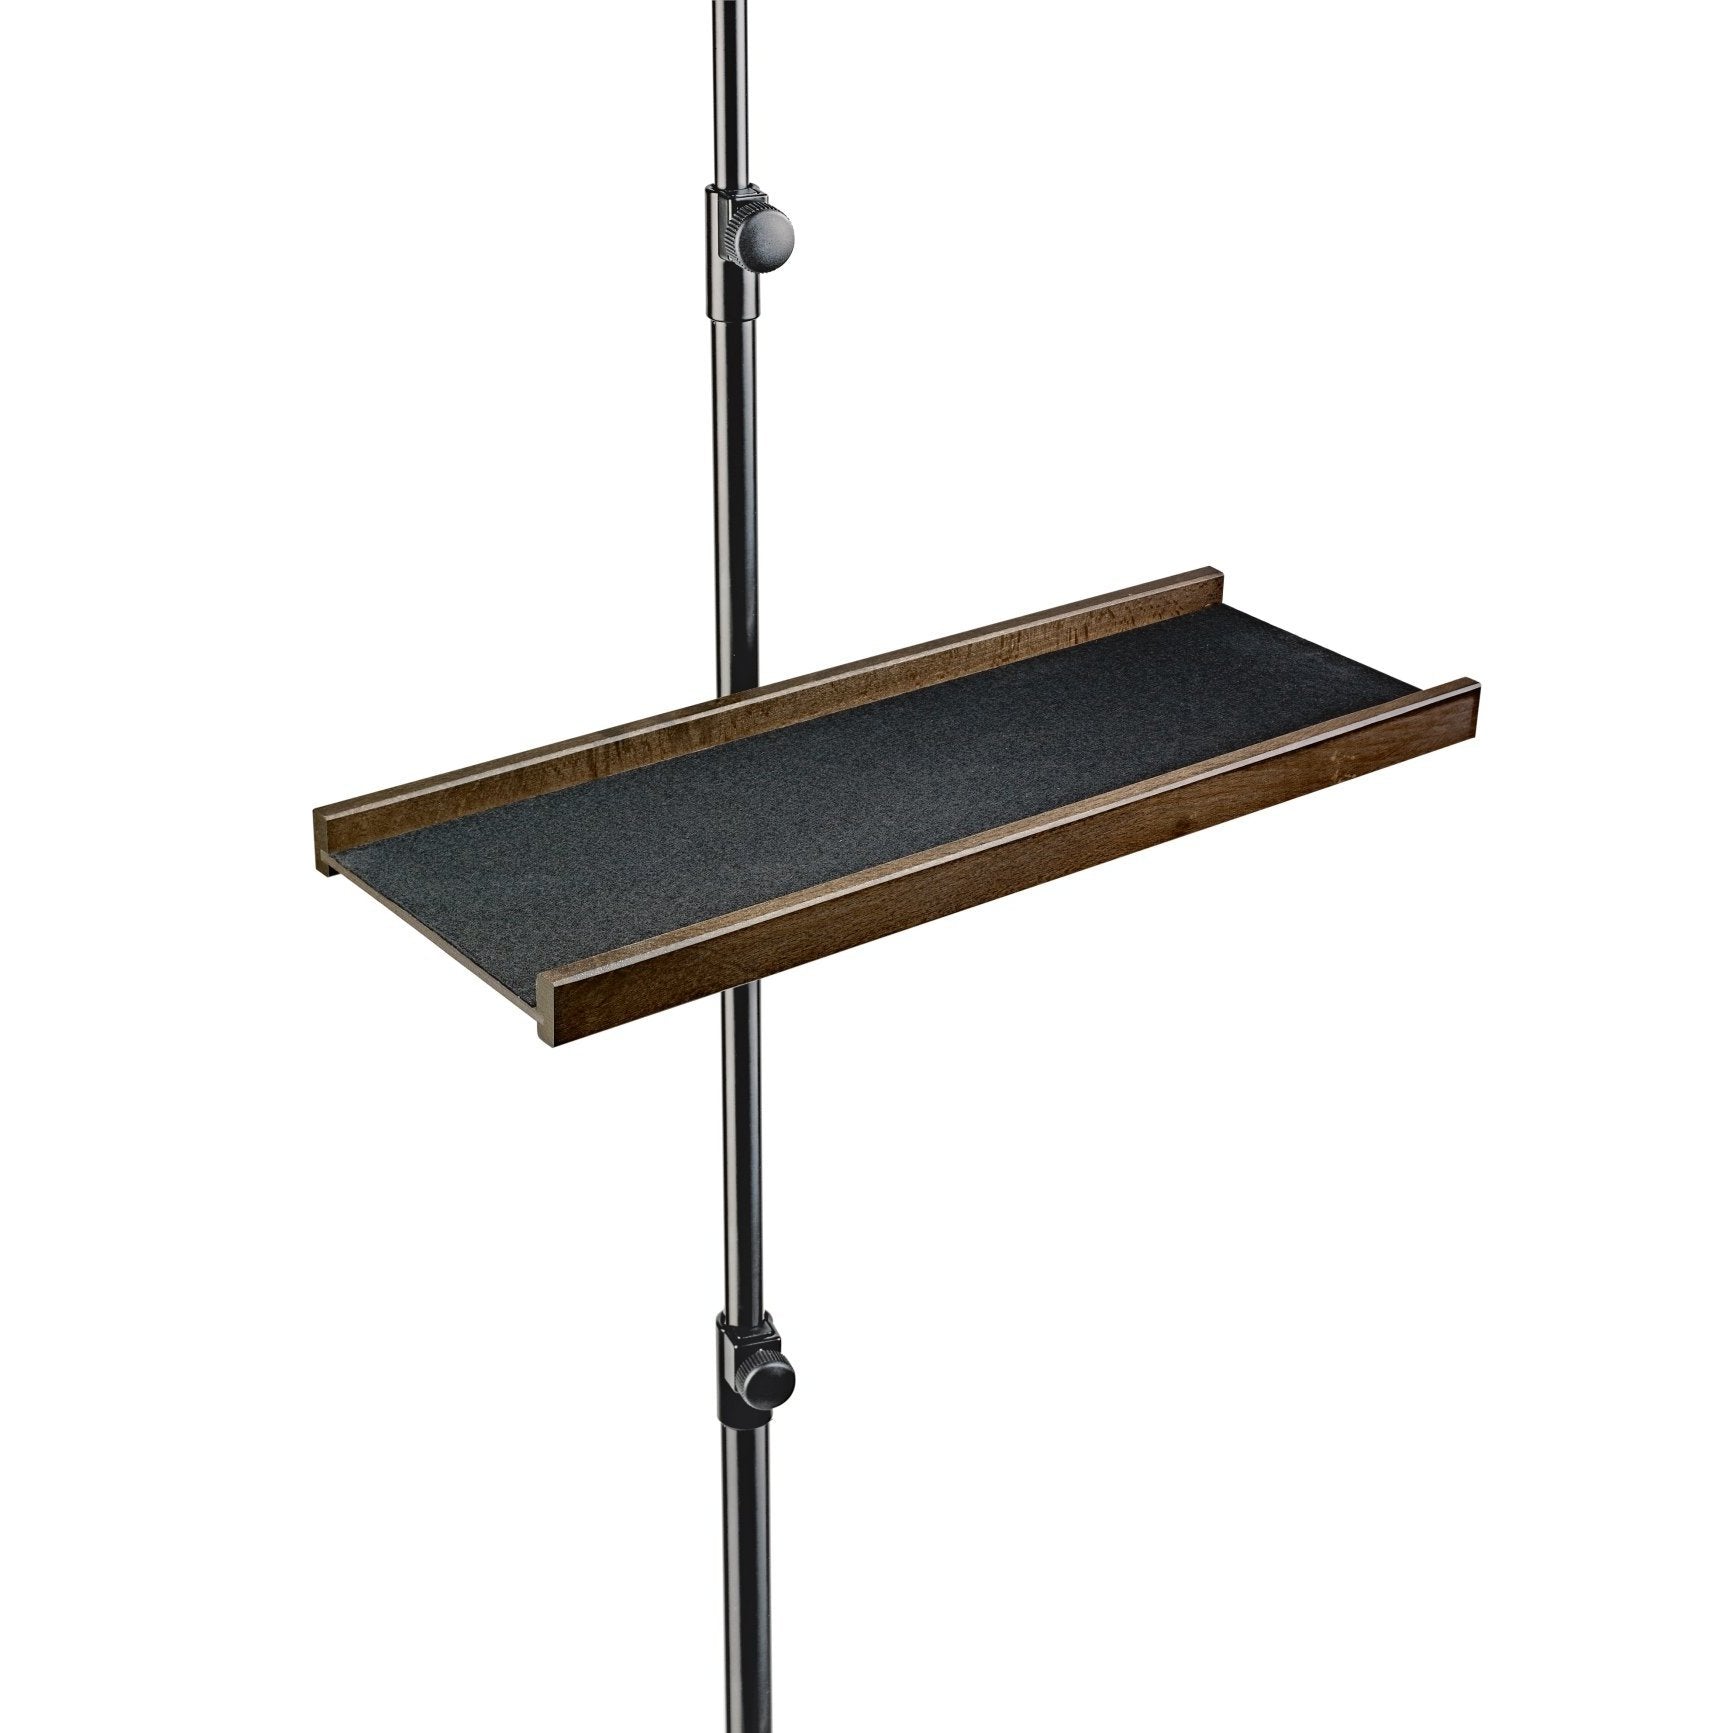 KÃ¶nig & Meyer - 122a Walnut Wooden Tray (Attachable to Stands)-Music Stand-KÃ¶nig & Meyer-Music Elements